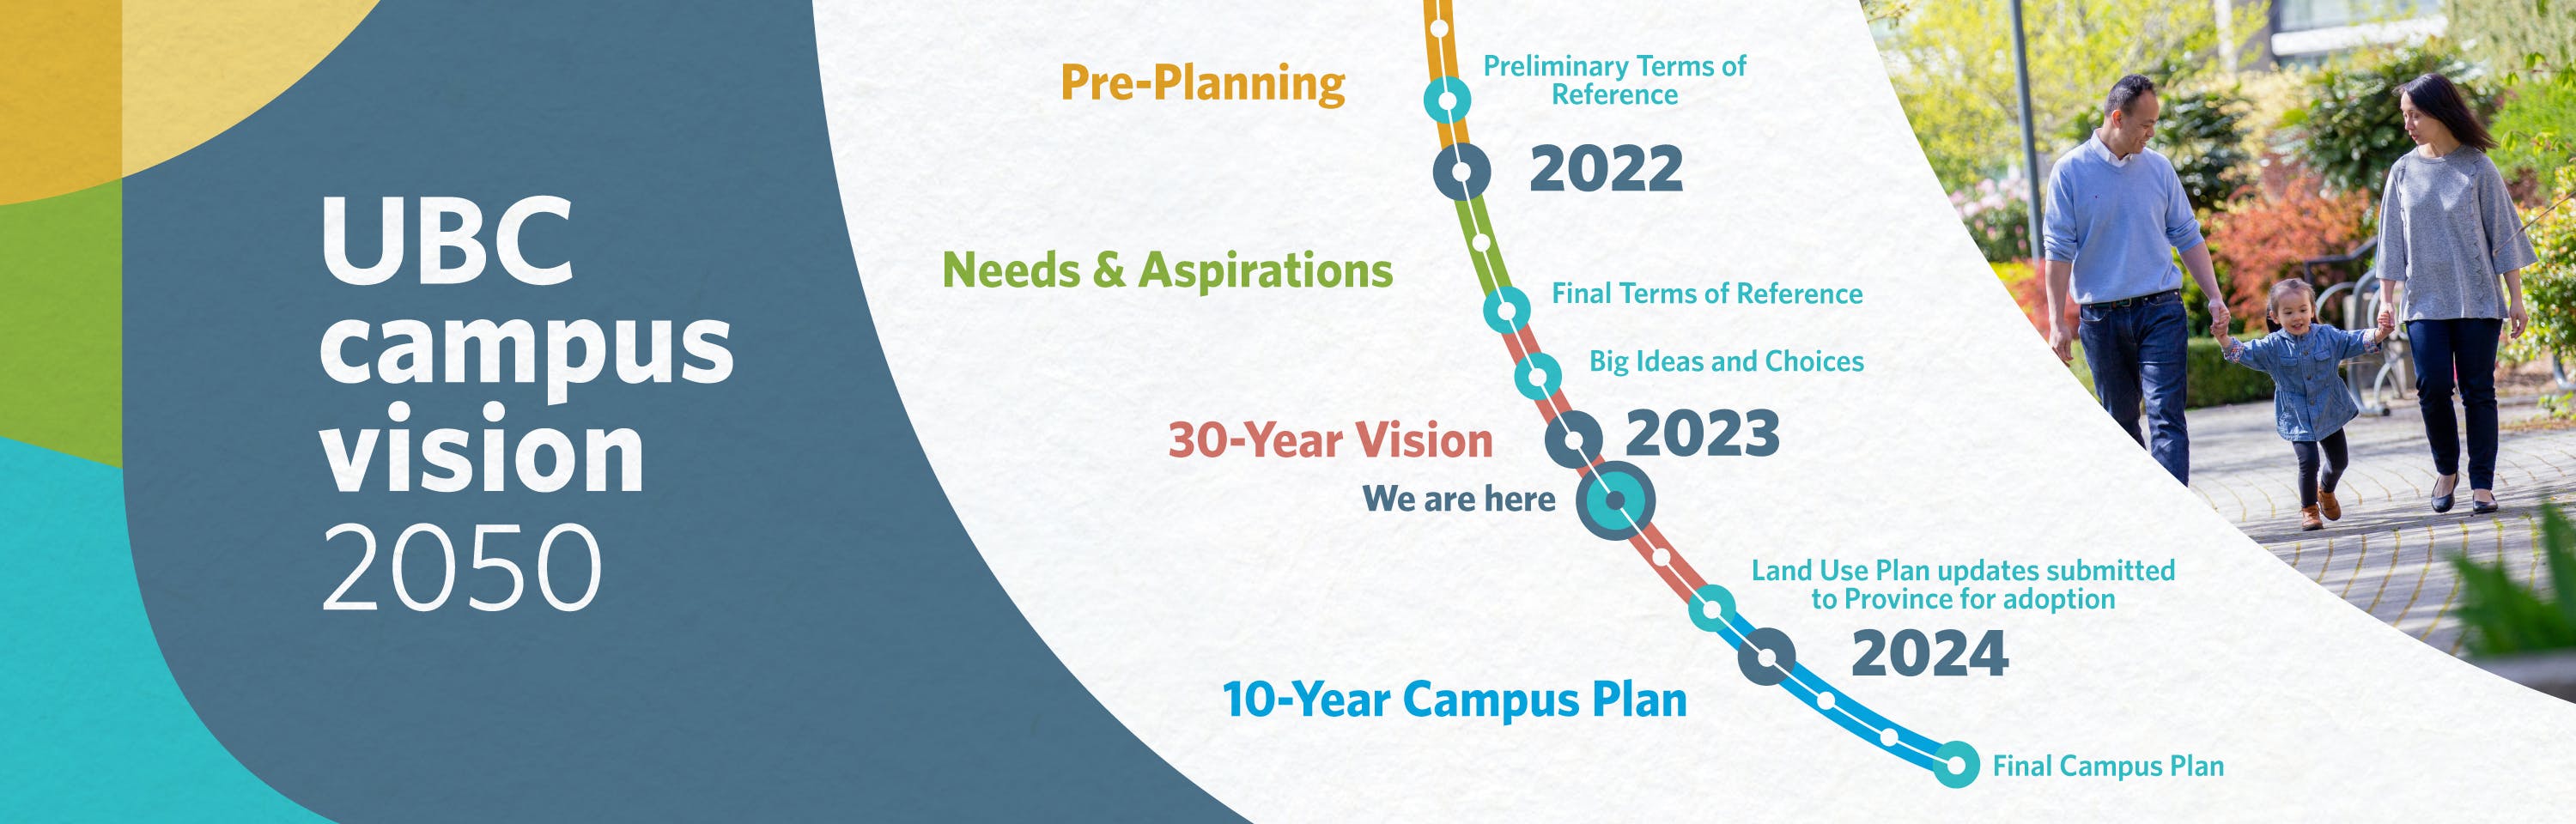 Timeline graphic that describes the Campus Vision 2050 key milestones from November 2021 to December 2024 